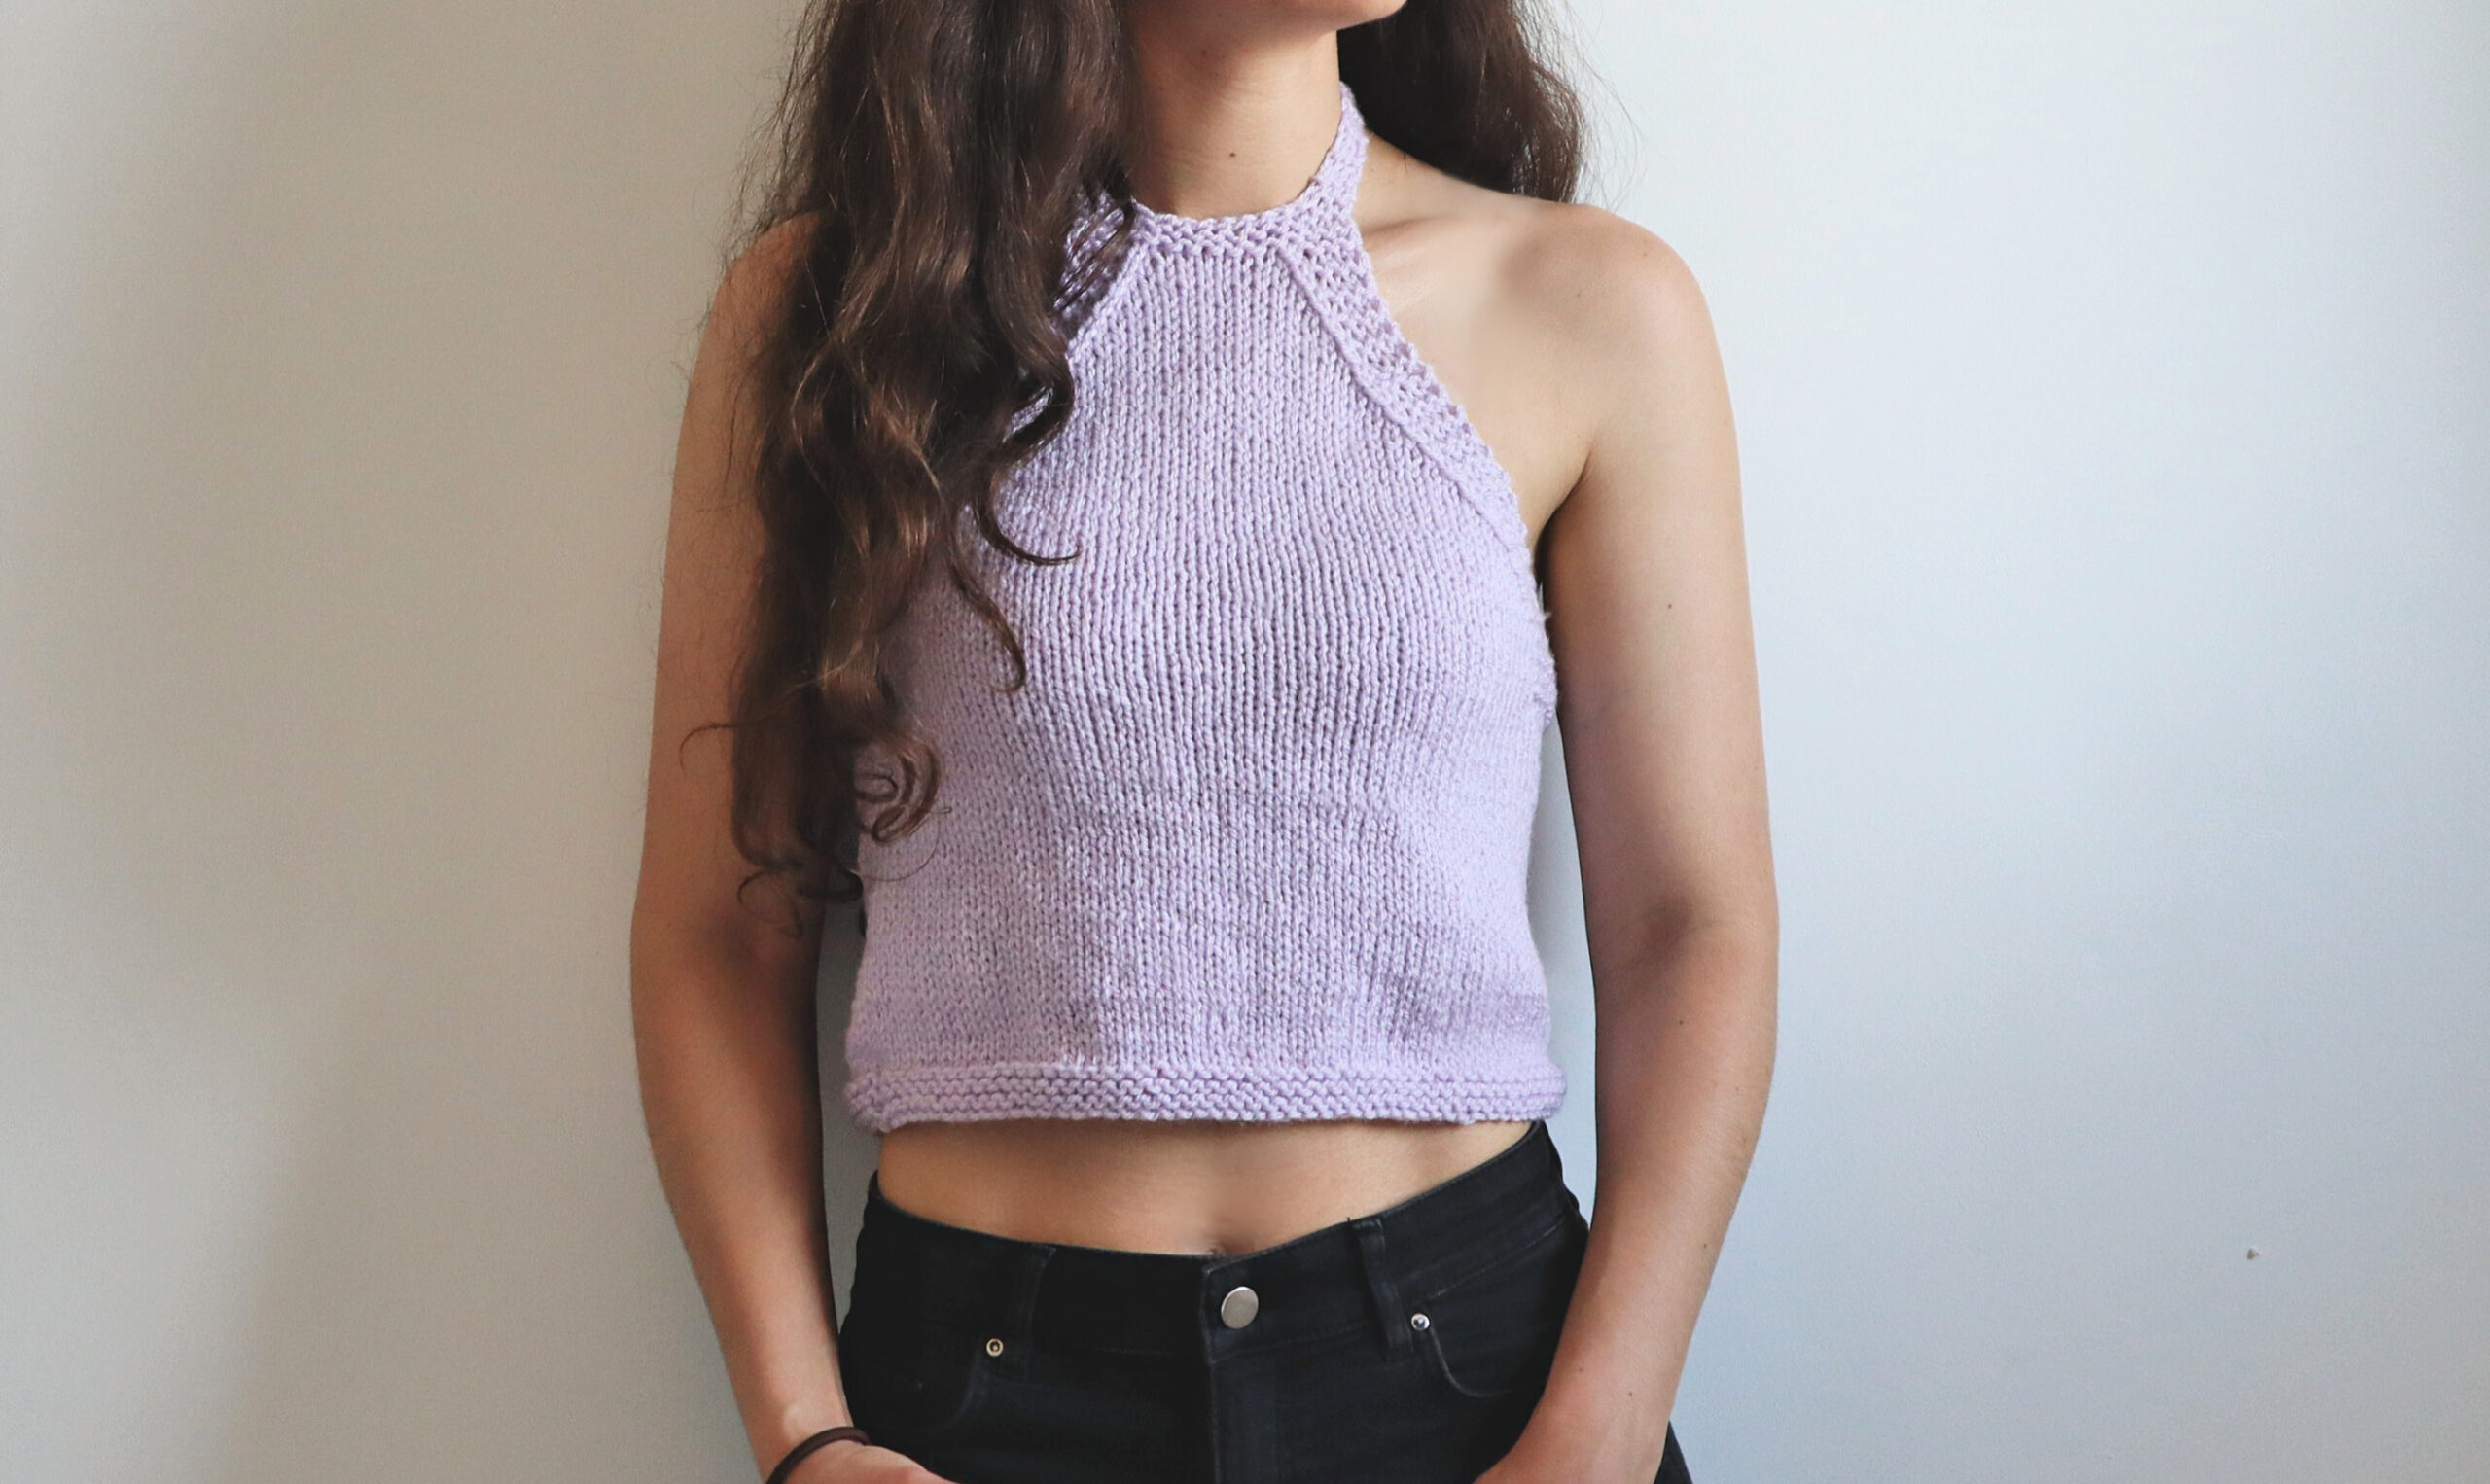 Simple Knit Halter Top – Knitted Crop Top Pattern – The Snugglery